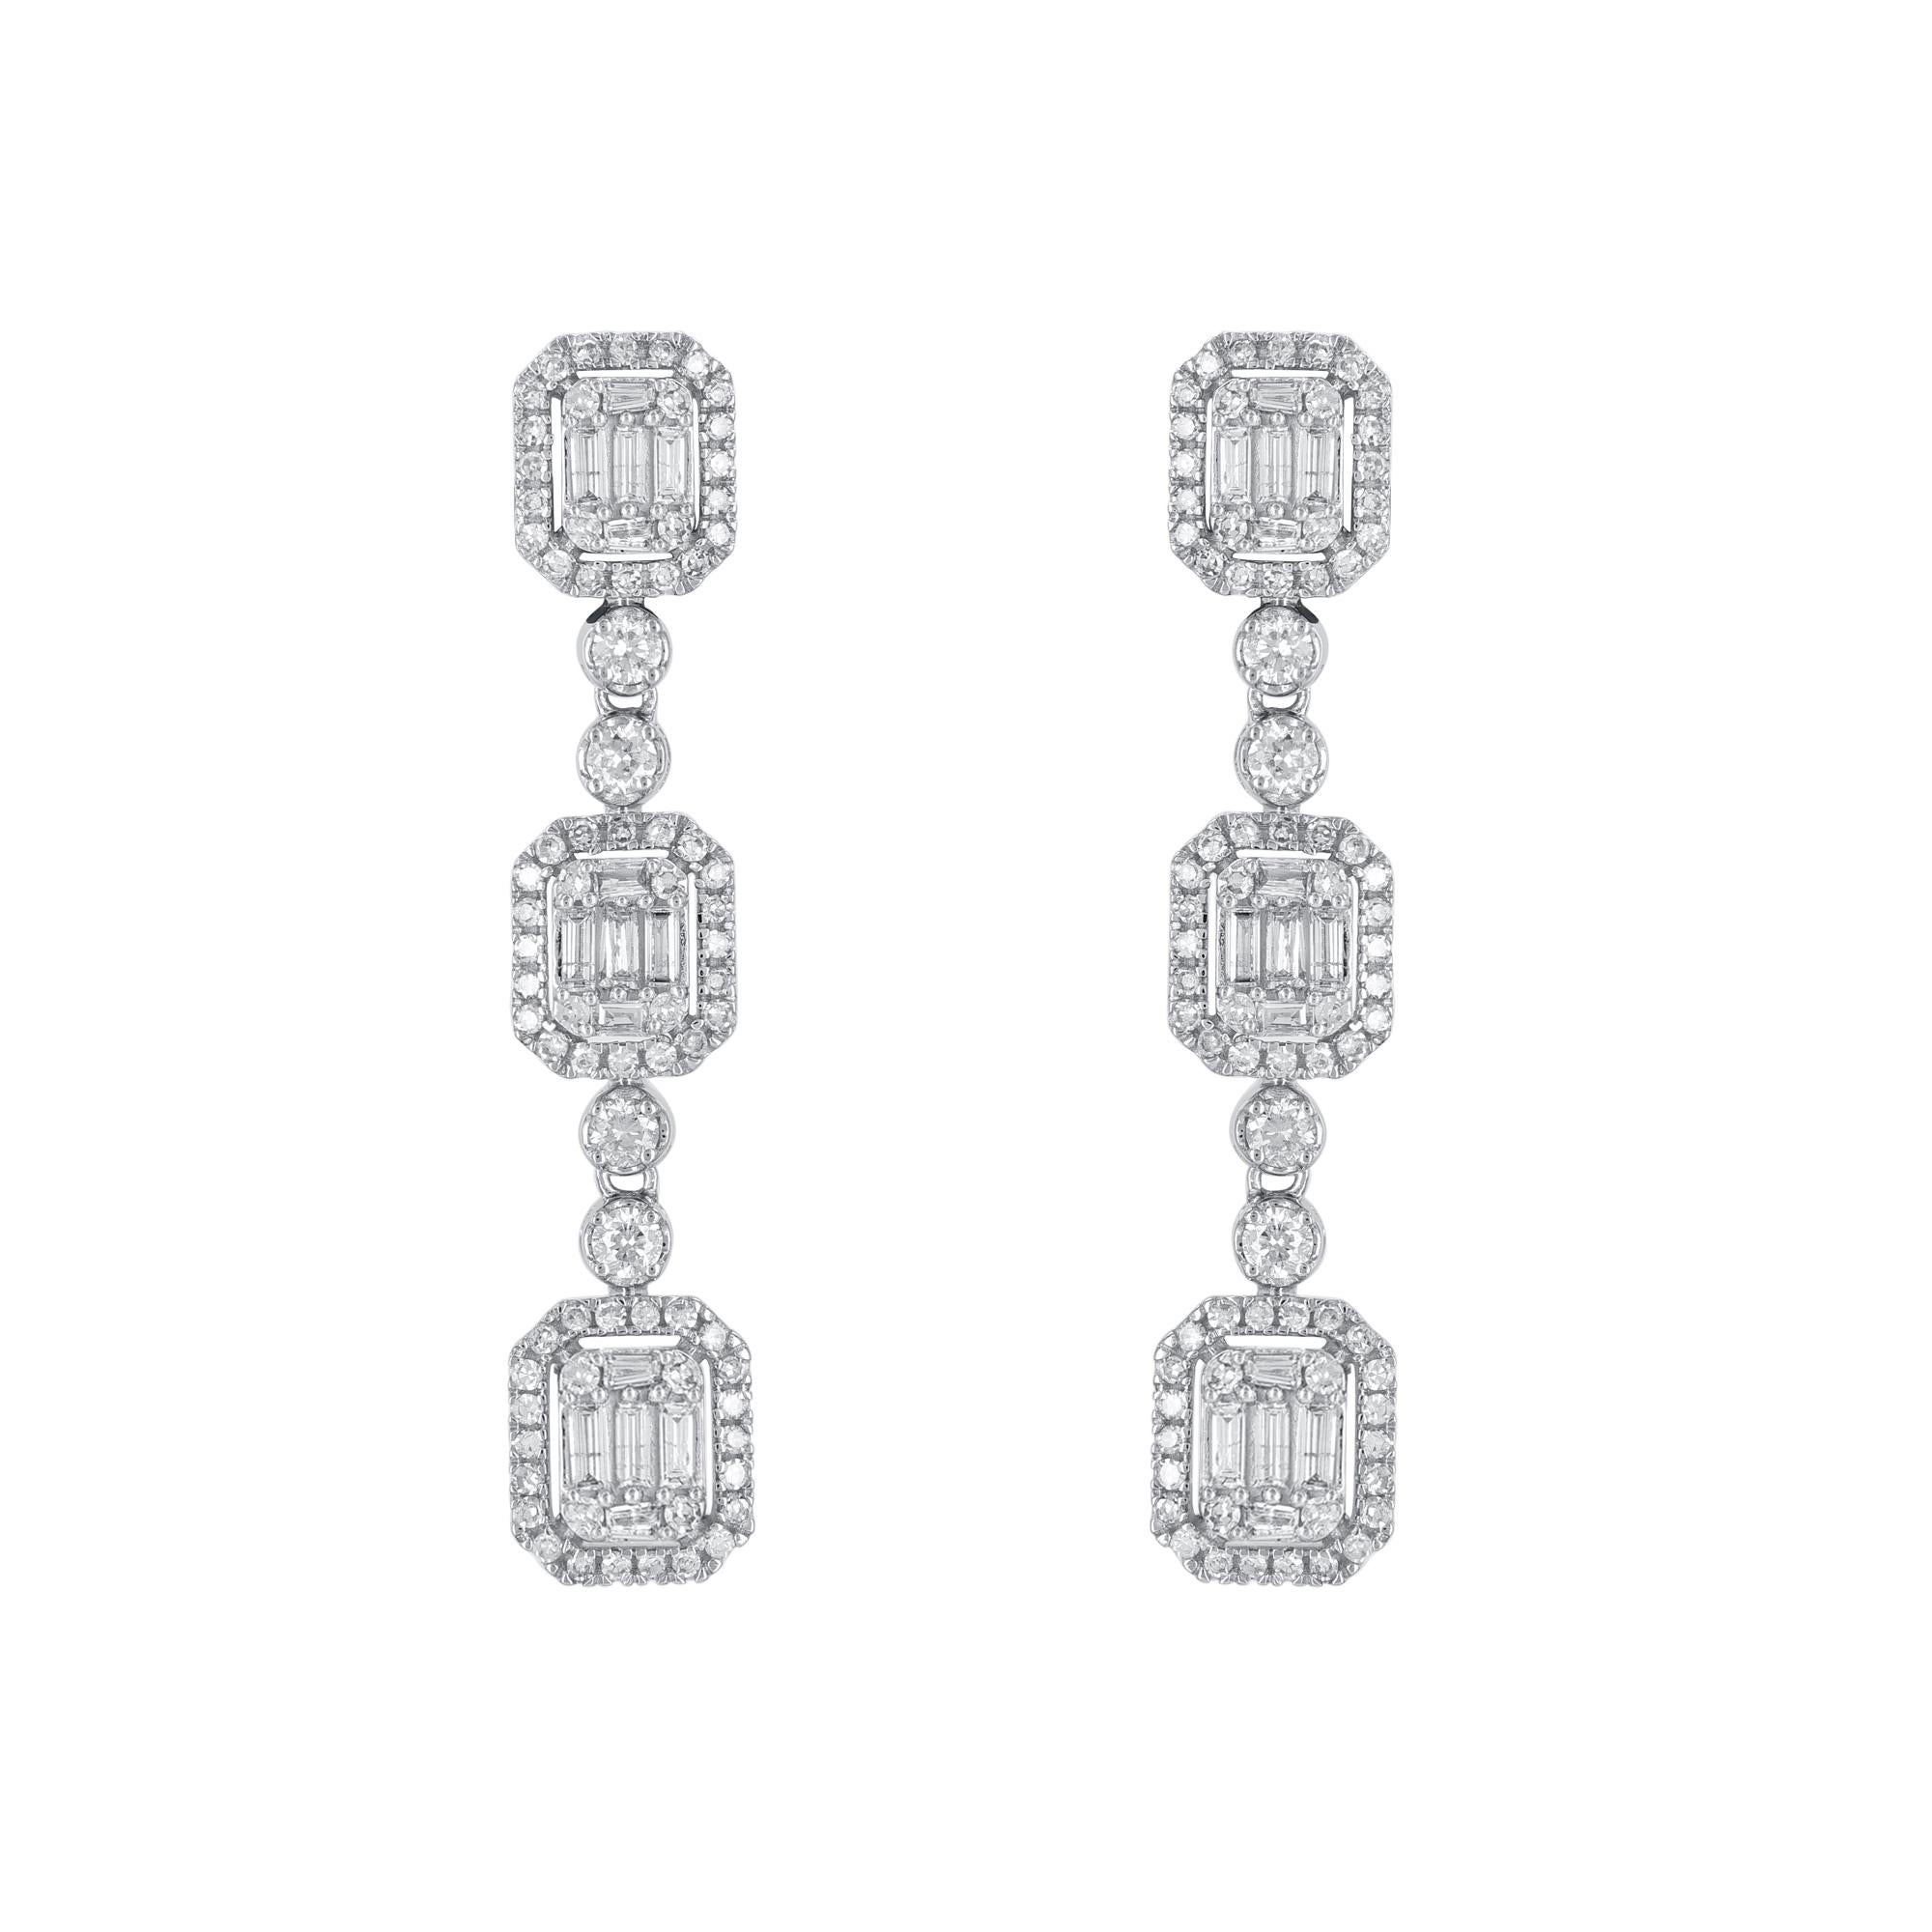 These shimmering and striking diamond stud earrings are perfect for yourself or for gifting to someone special. 
Crafted in 14 karat white gold, earring is filled with 186 brilliant cut, Single cut round diamonds & baguette diamonds in prong and